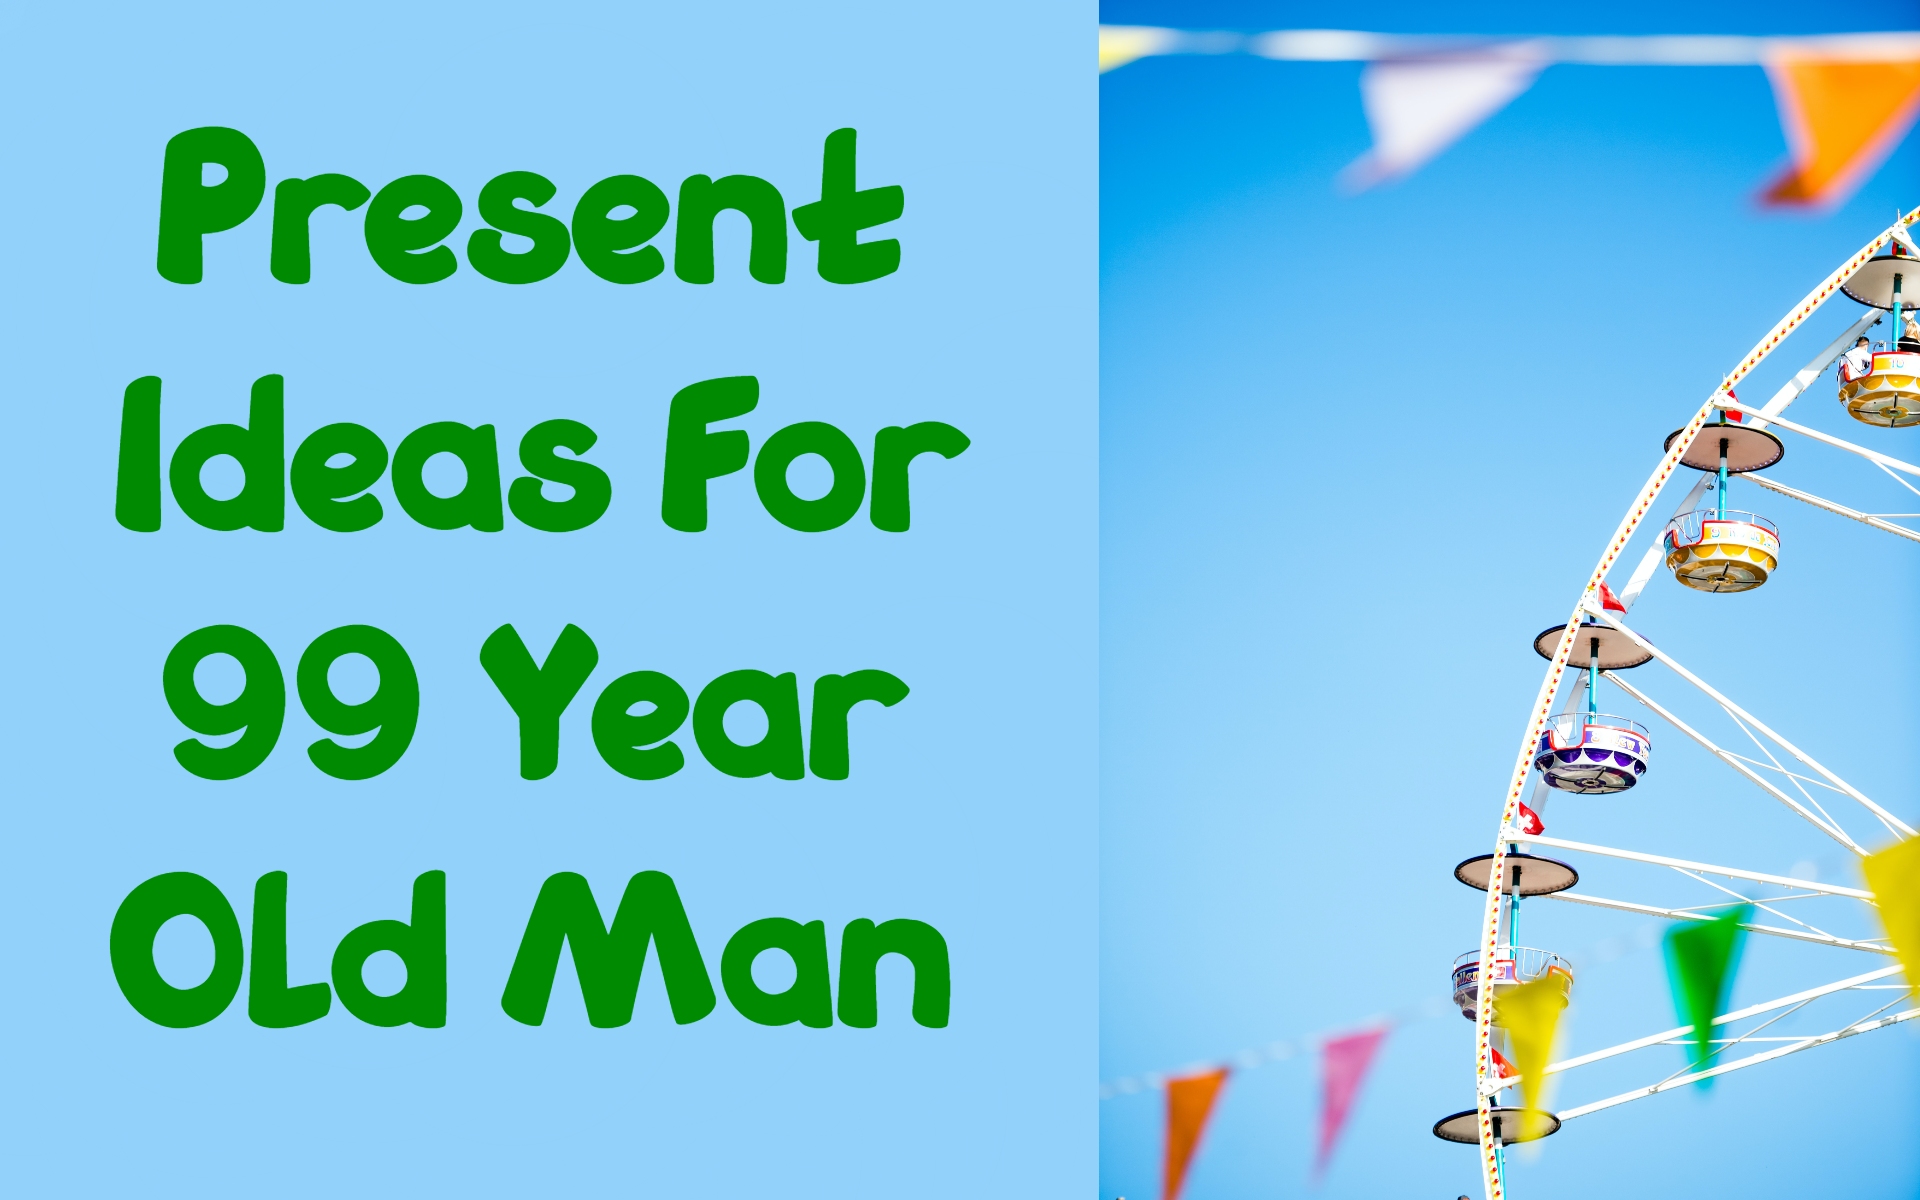 Cover image of gift ideas for 99-year-old man by Giftsedge